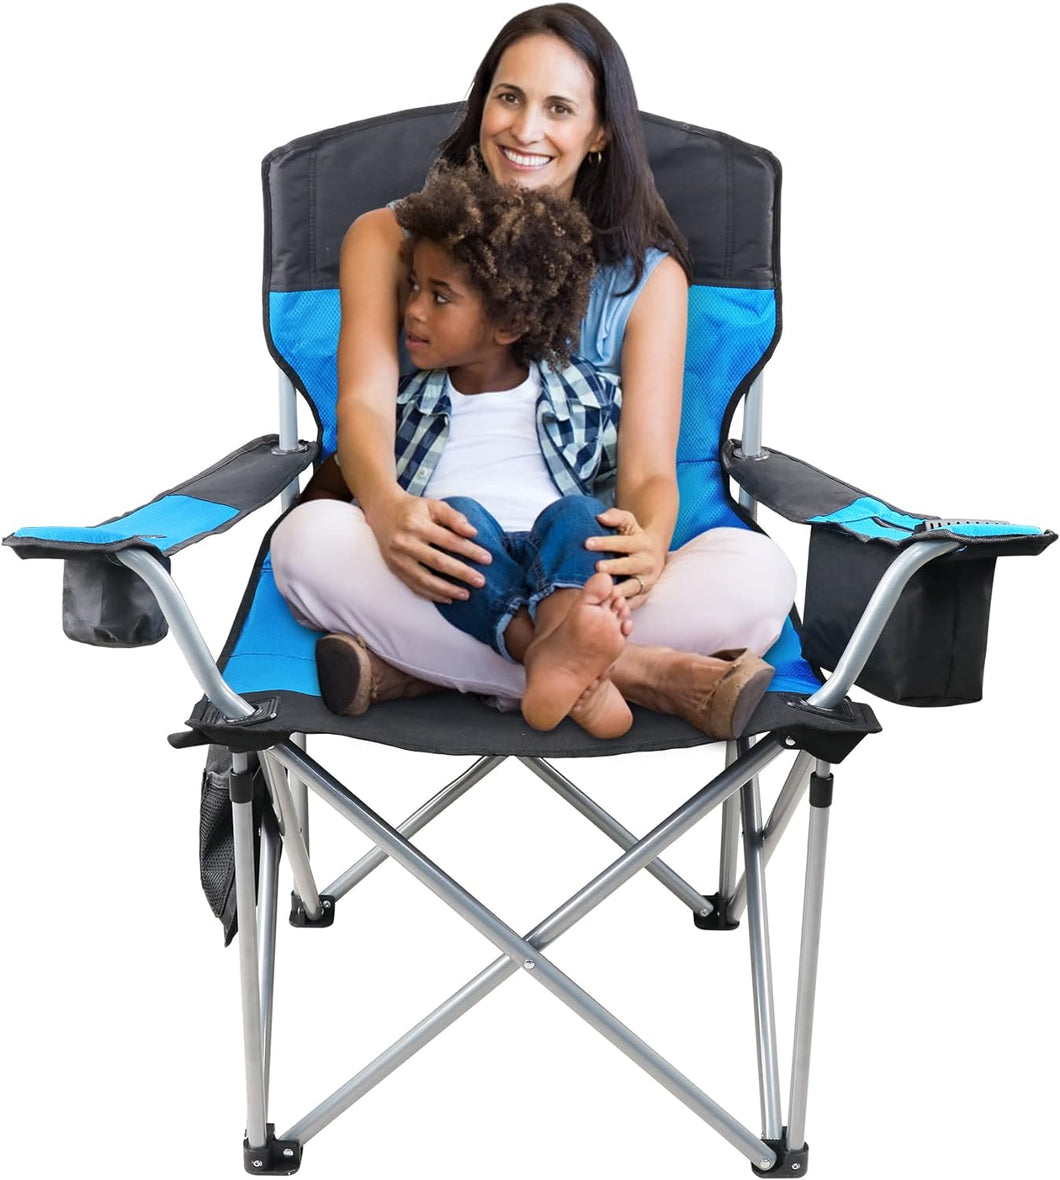 Beach Chair for Adults, Oversized Camping Chair 500lb, Folding Chair for Outside, Heavy Duty Portable Chair with Armrest, Cooler Bag, Side Pocket, Cup Holder, Outdoor Folding Camping Chair